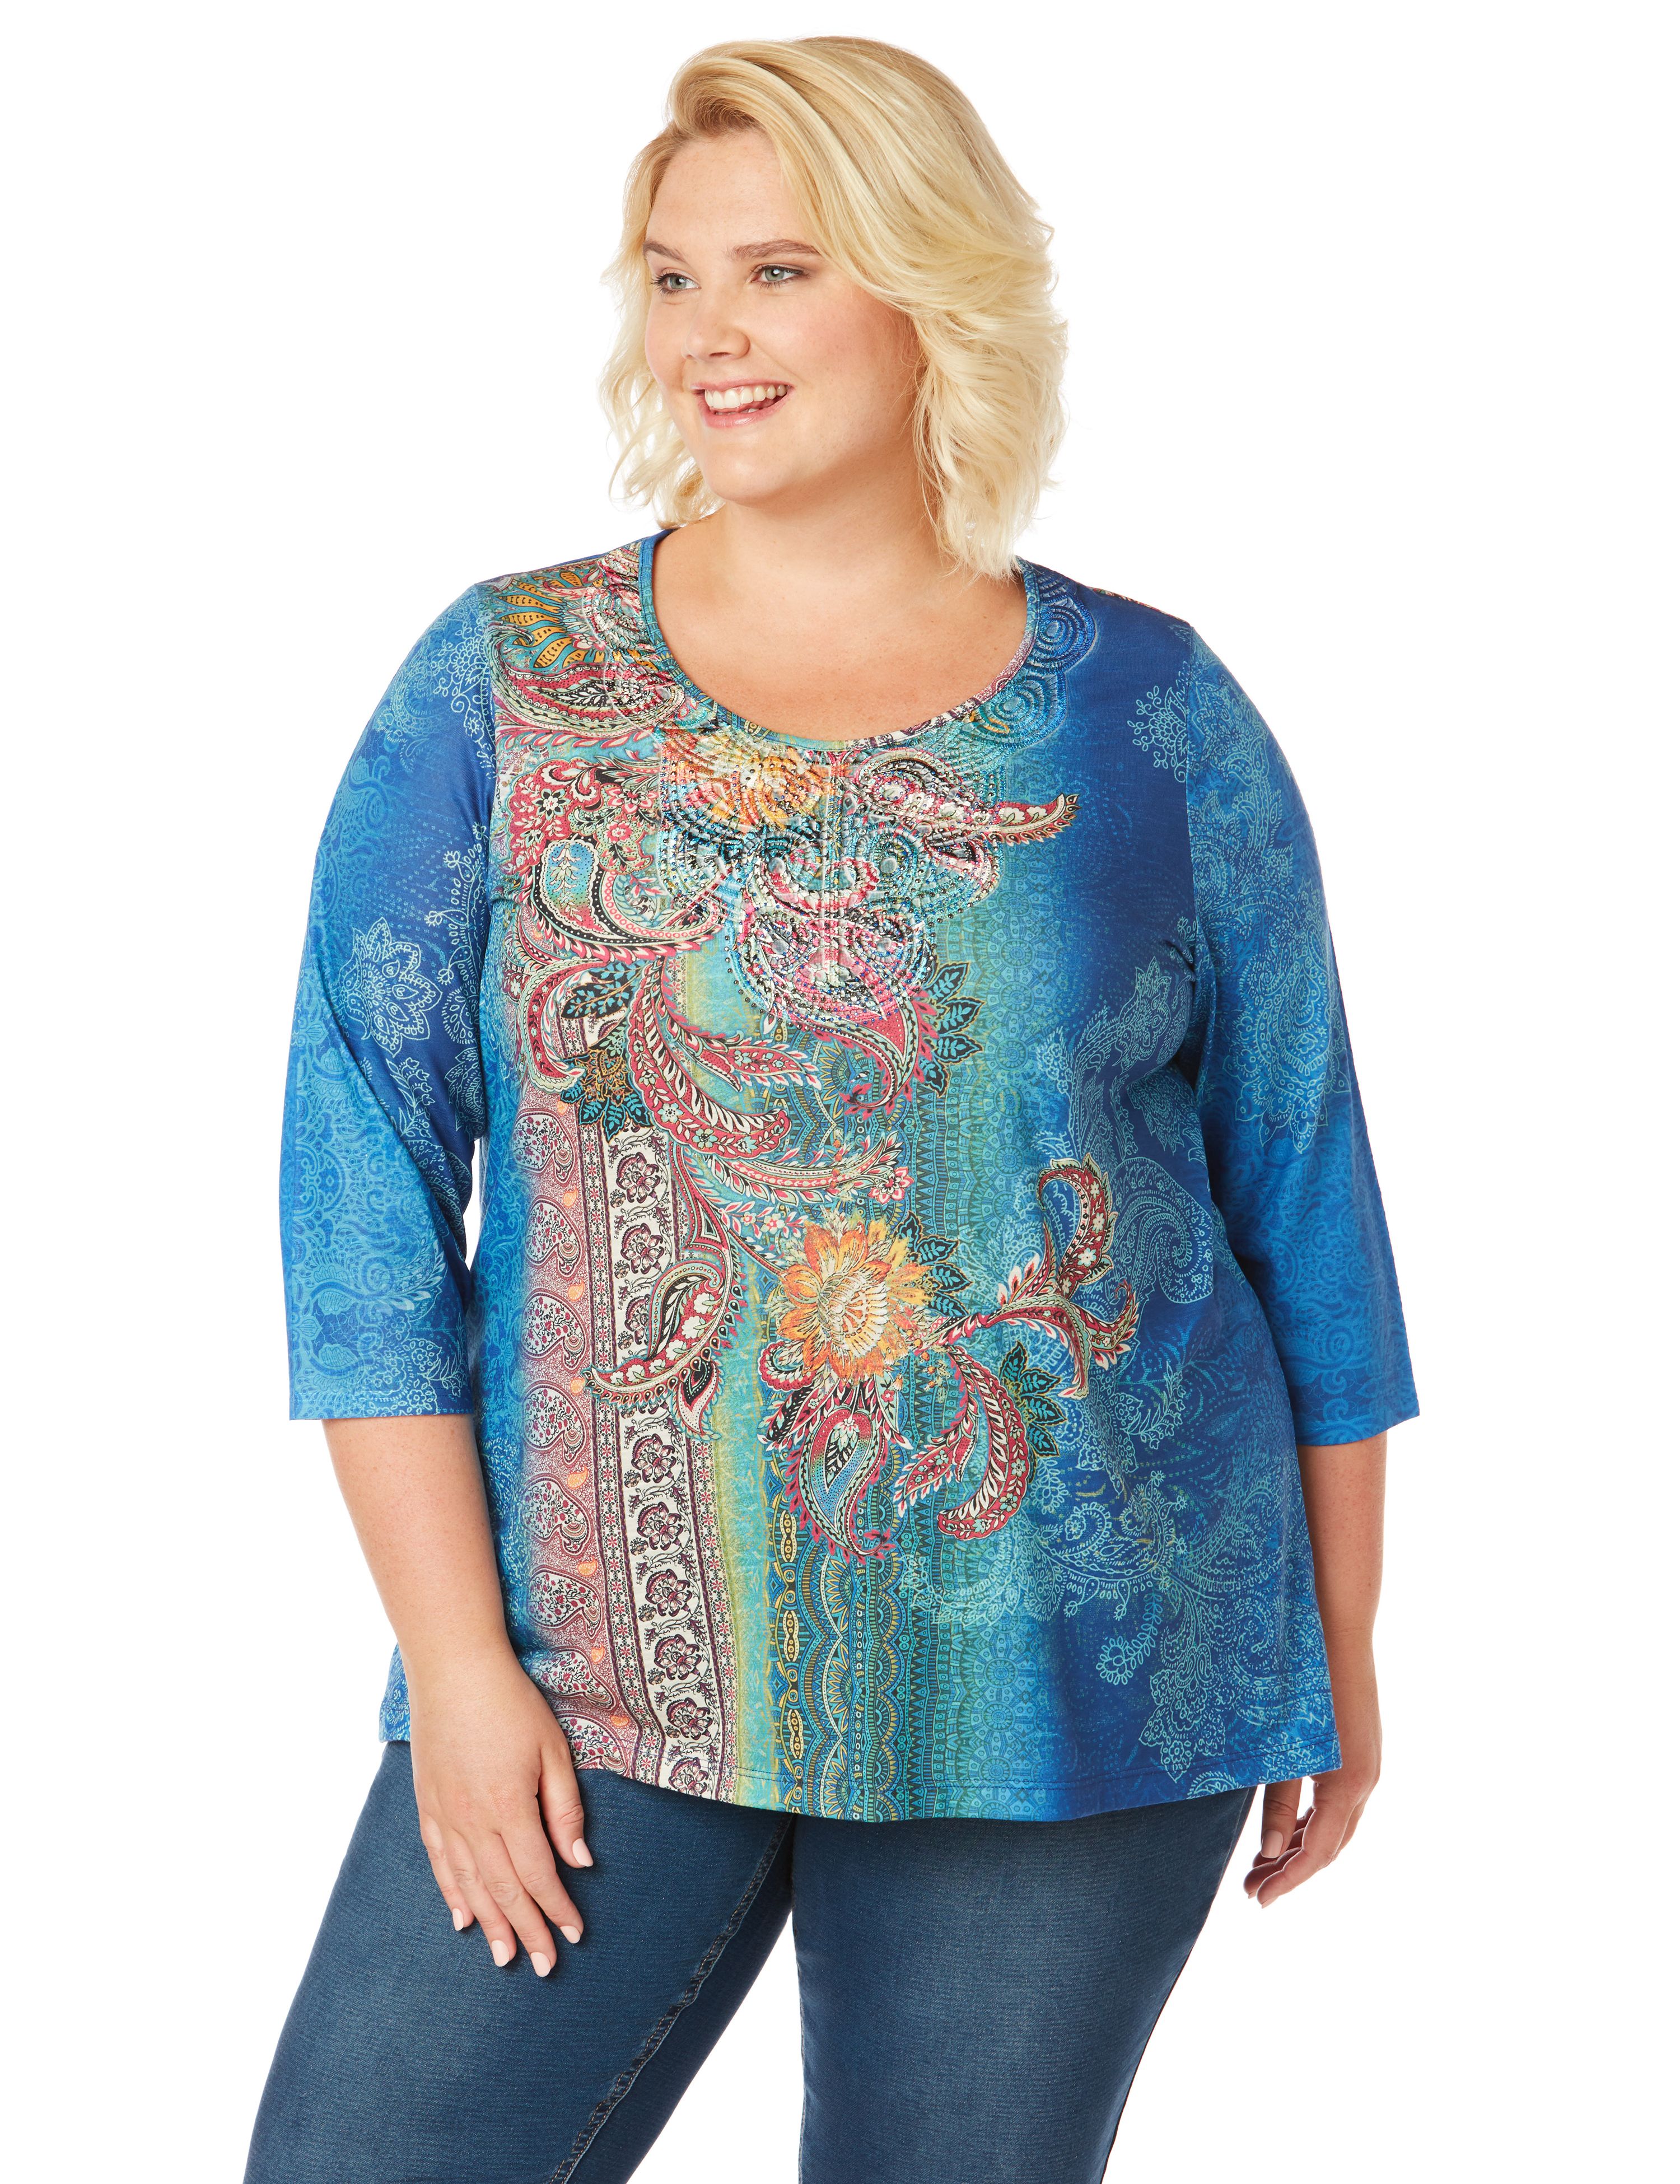 Clearance, Discounted & Sale Plus Size Clothing for Women | Catherines